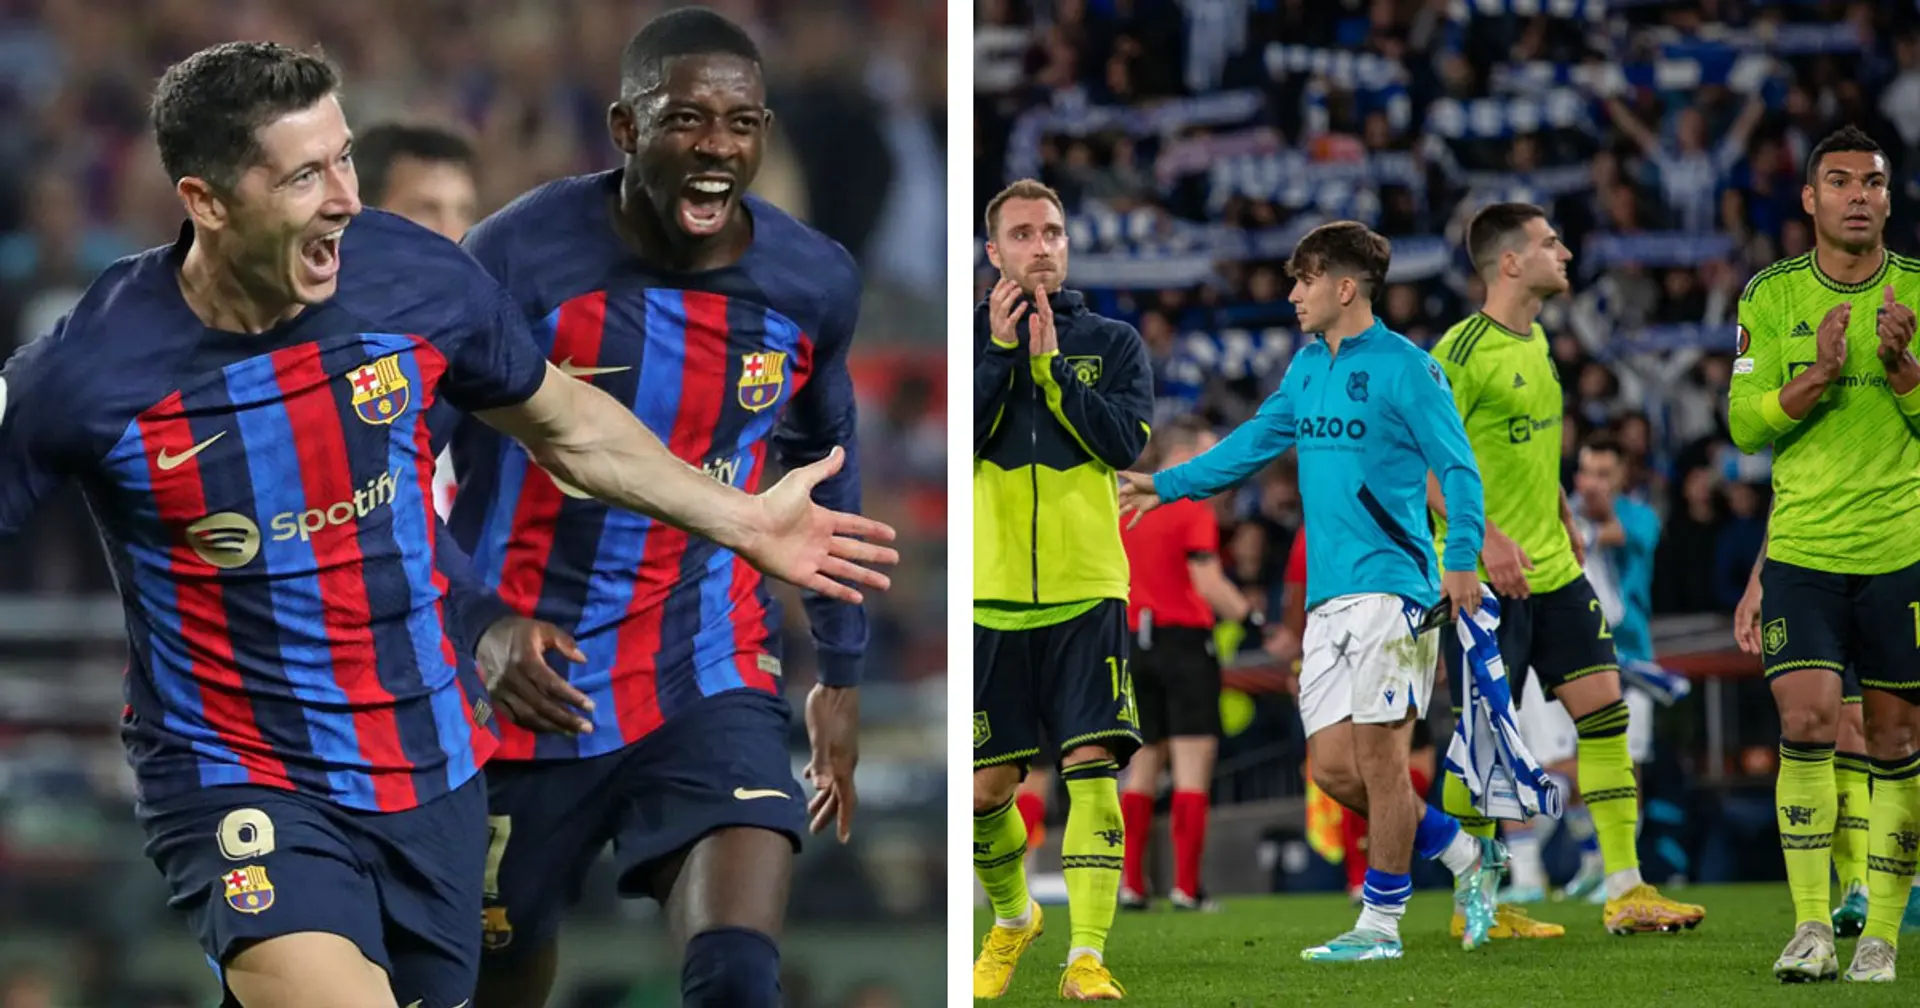 Barcelona, Juventus & 6 more: Man United's potential opponents in Europa League playoff clash revealed